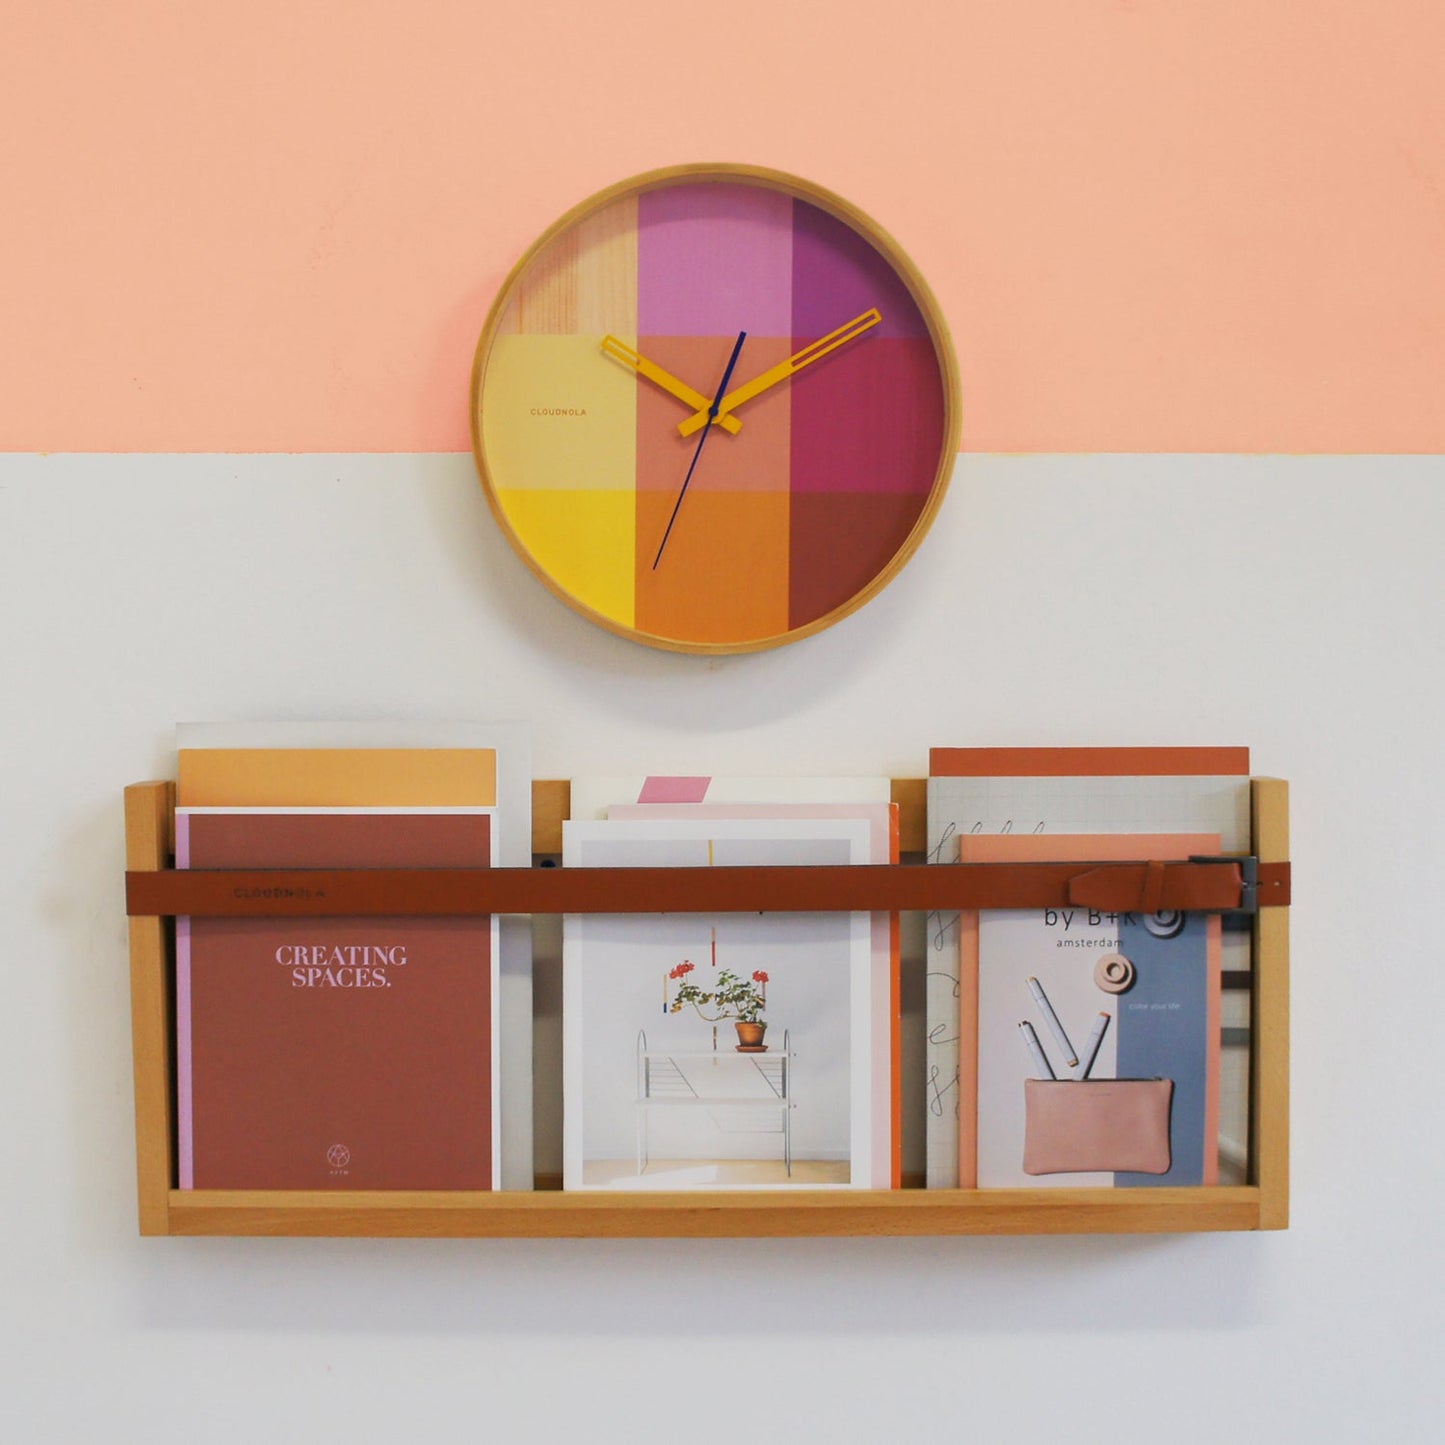 SAMPLE - Riso Magenta & Yellow Wall Clock - Wooden Artistry - Bold Timepiece